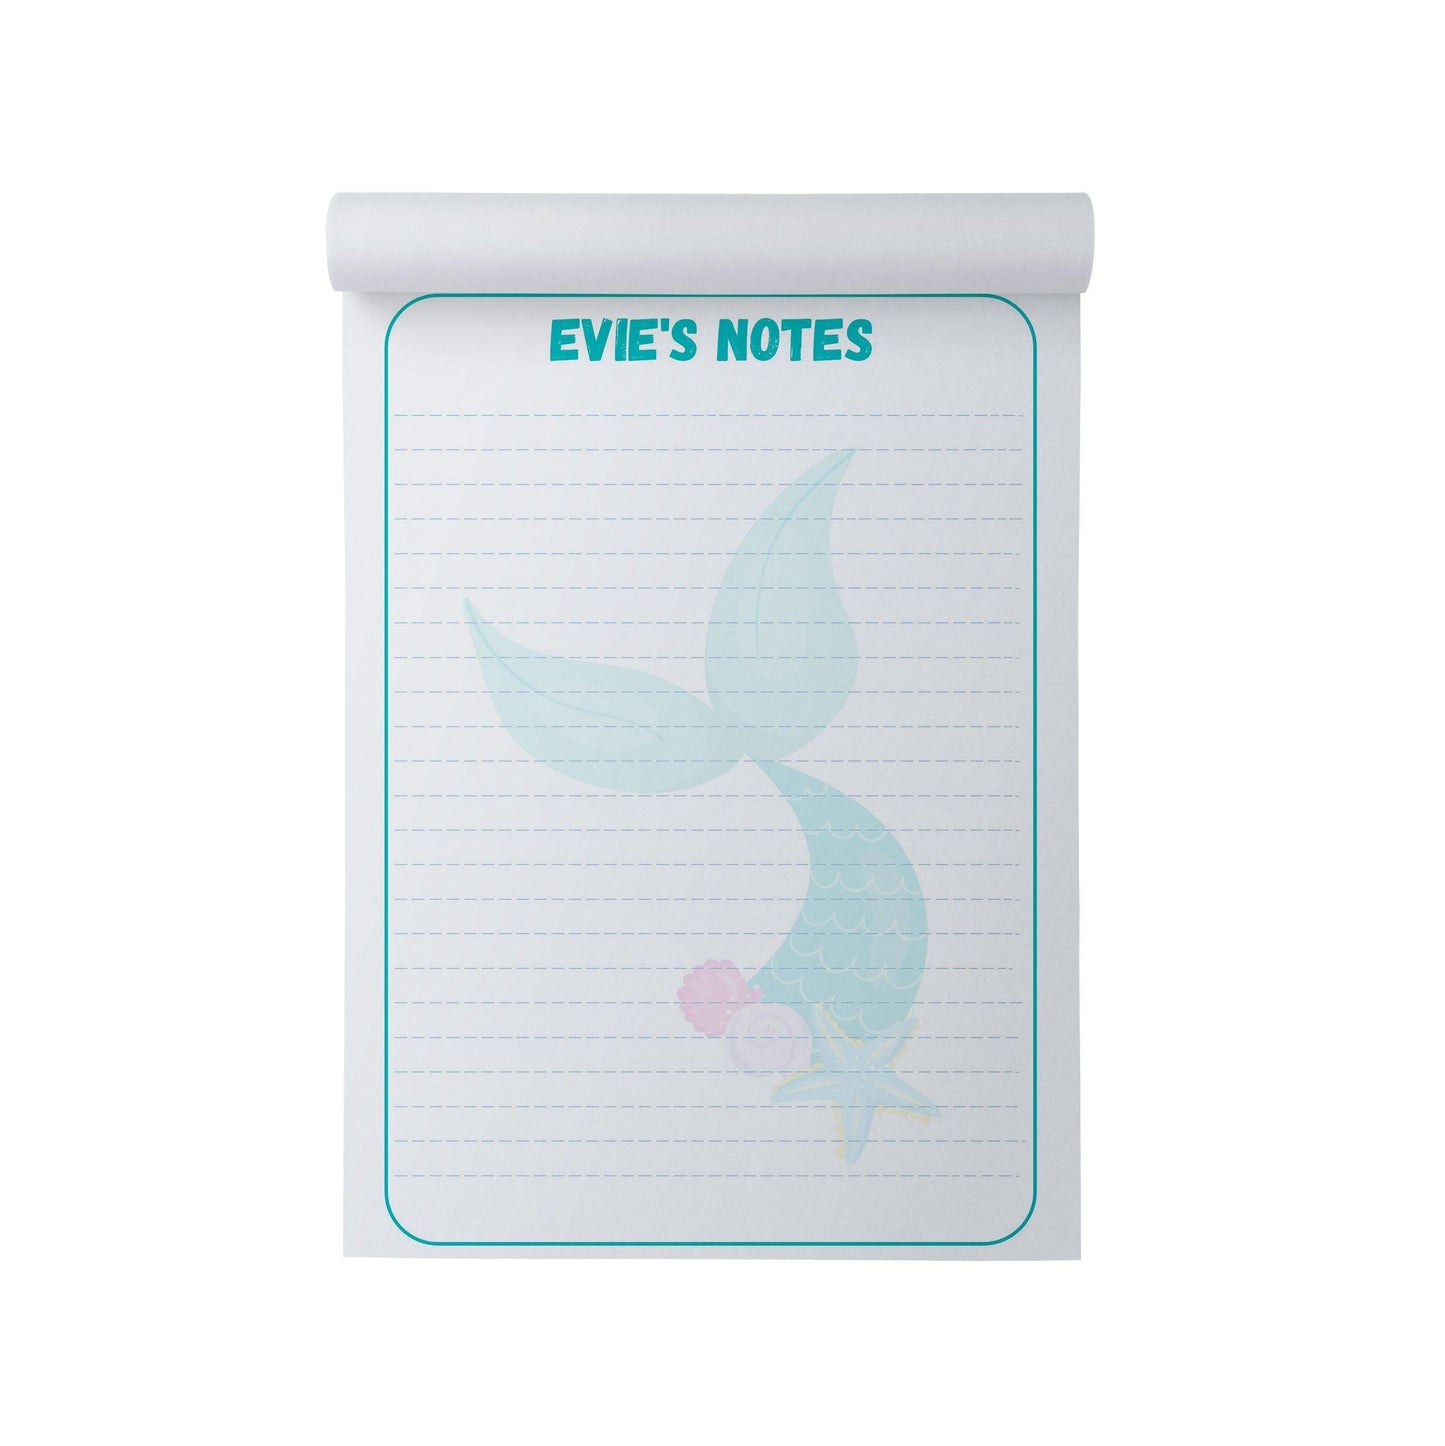  Mermaid Personalised Note Pad, A5 With 50 Tear-off Sheets by PMPRINTED 